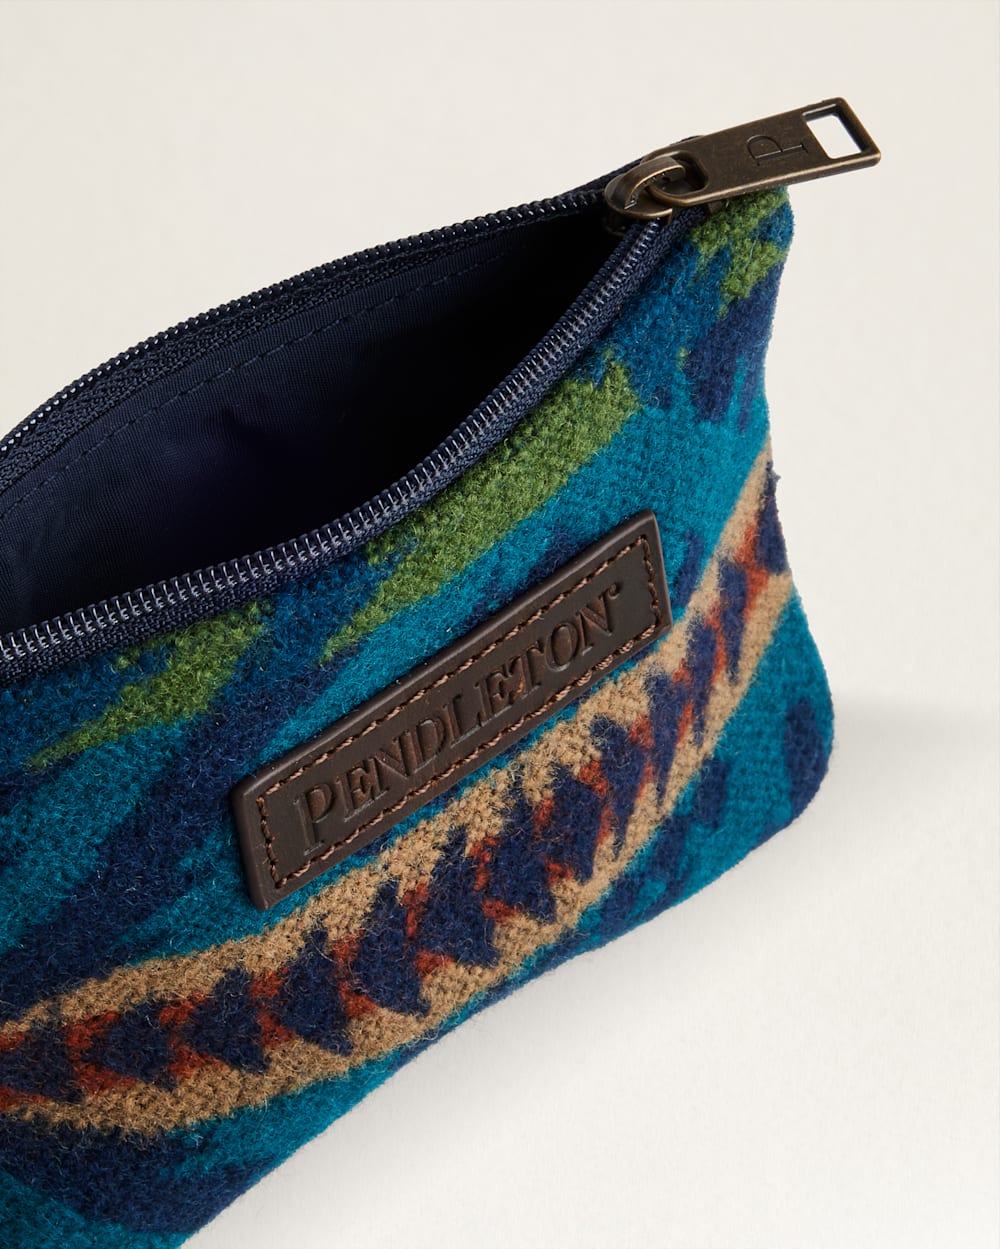 ALTERNATE VIEW OF DIAMOND DESERT ID POUCH IN BLUE MULTI image number 3